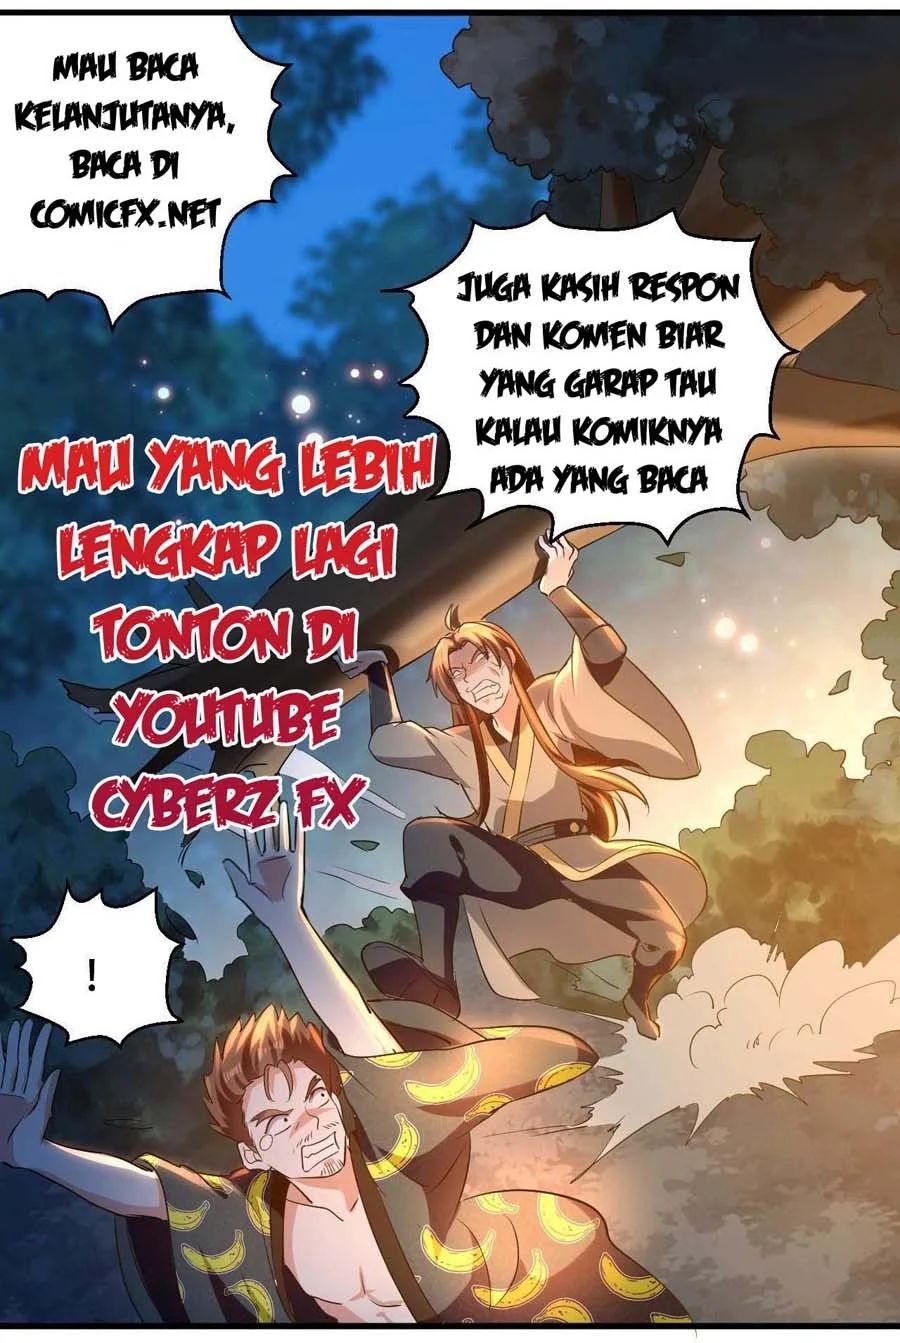 The Nine Heaven Of Martial Arts Chapter 125